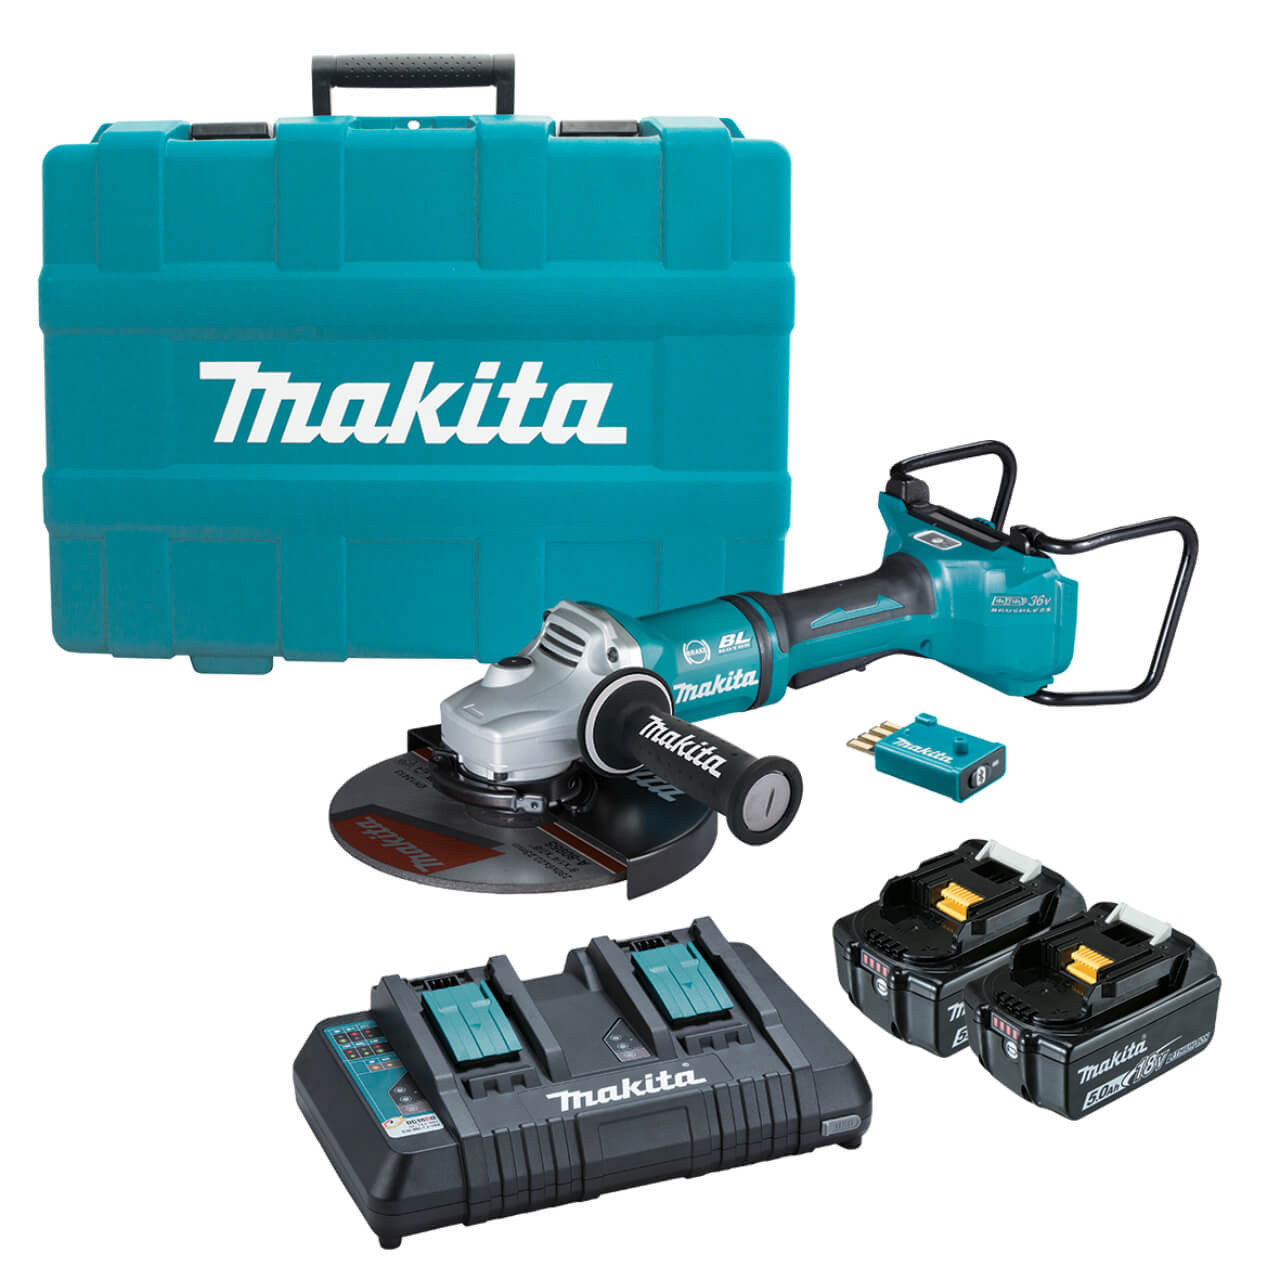 Makita 18Vx2 BRUSHLESS AWS 230mm Paddle Switch Angle Grinder Kit - Includes 2 x 5.0Ah Batteries. Dual Port Rapid Charger & Carry Case